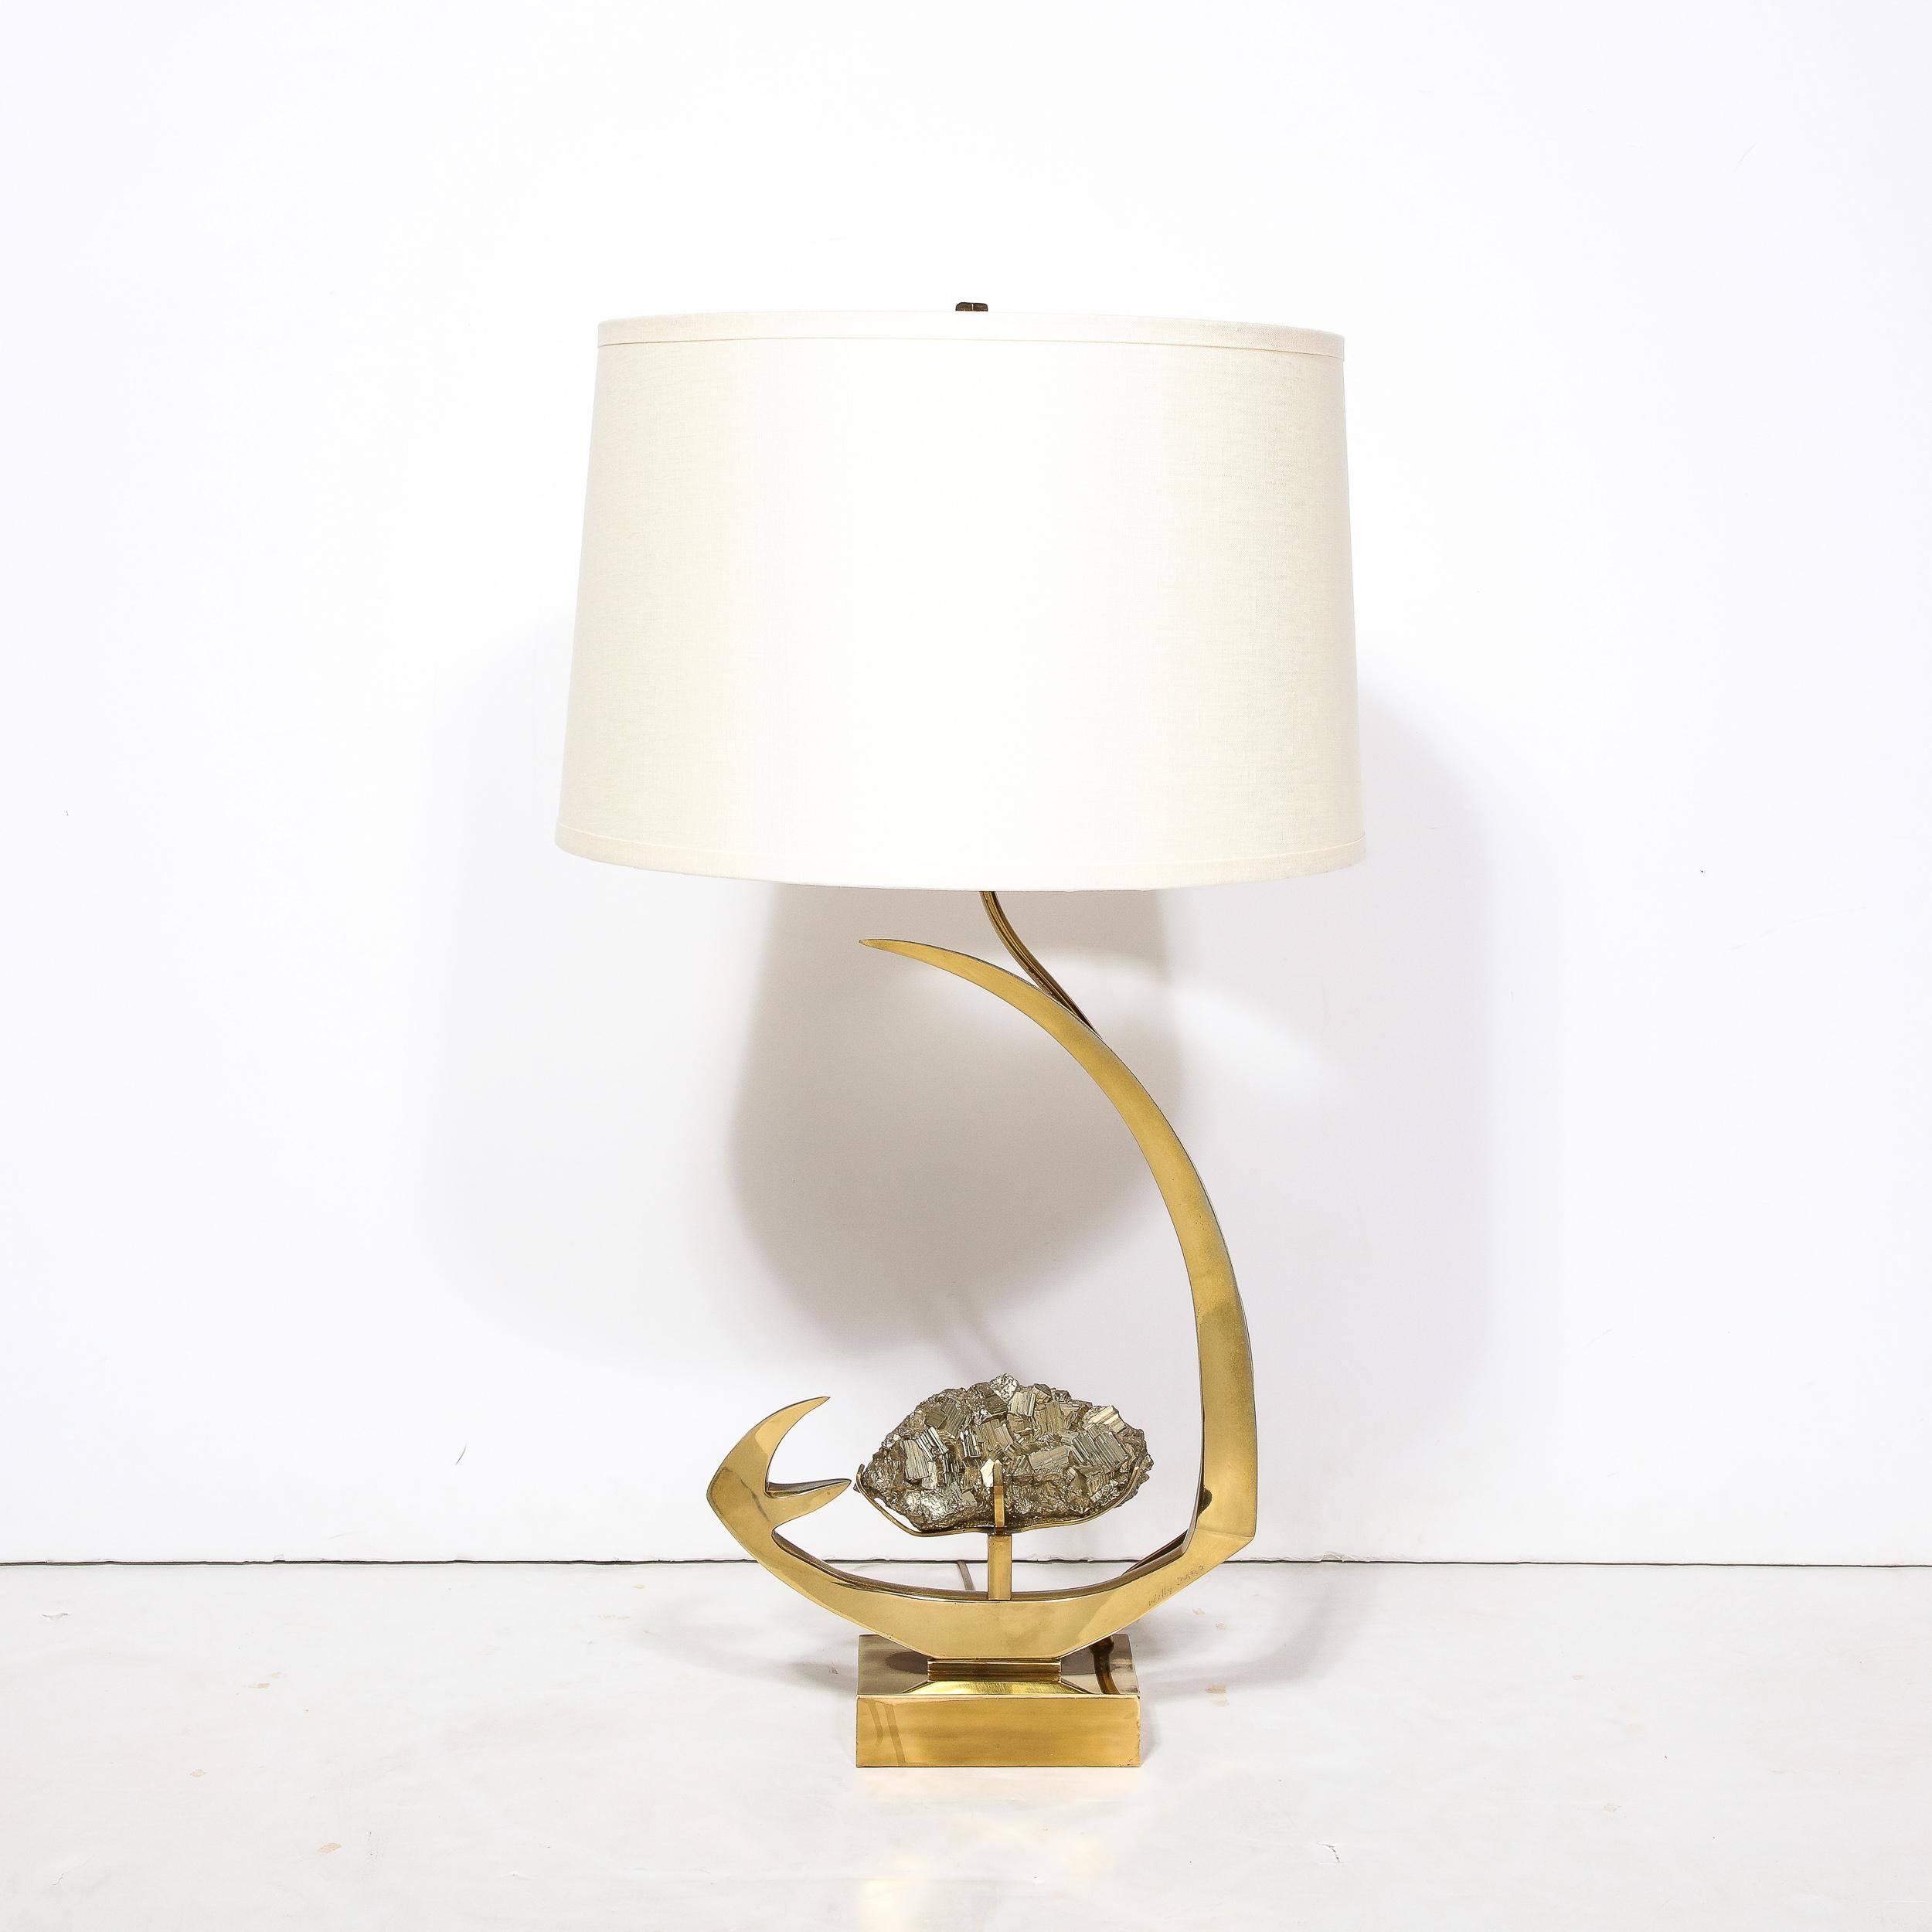 Belgian Mid-Century Modern Sculptural Polished Brass & Pyrite Table Lamp by Willy Daro For Sale